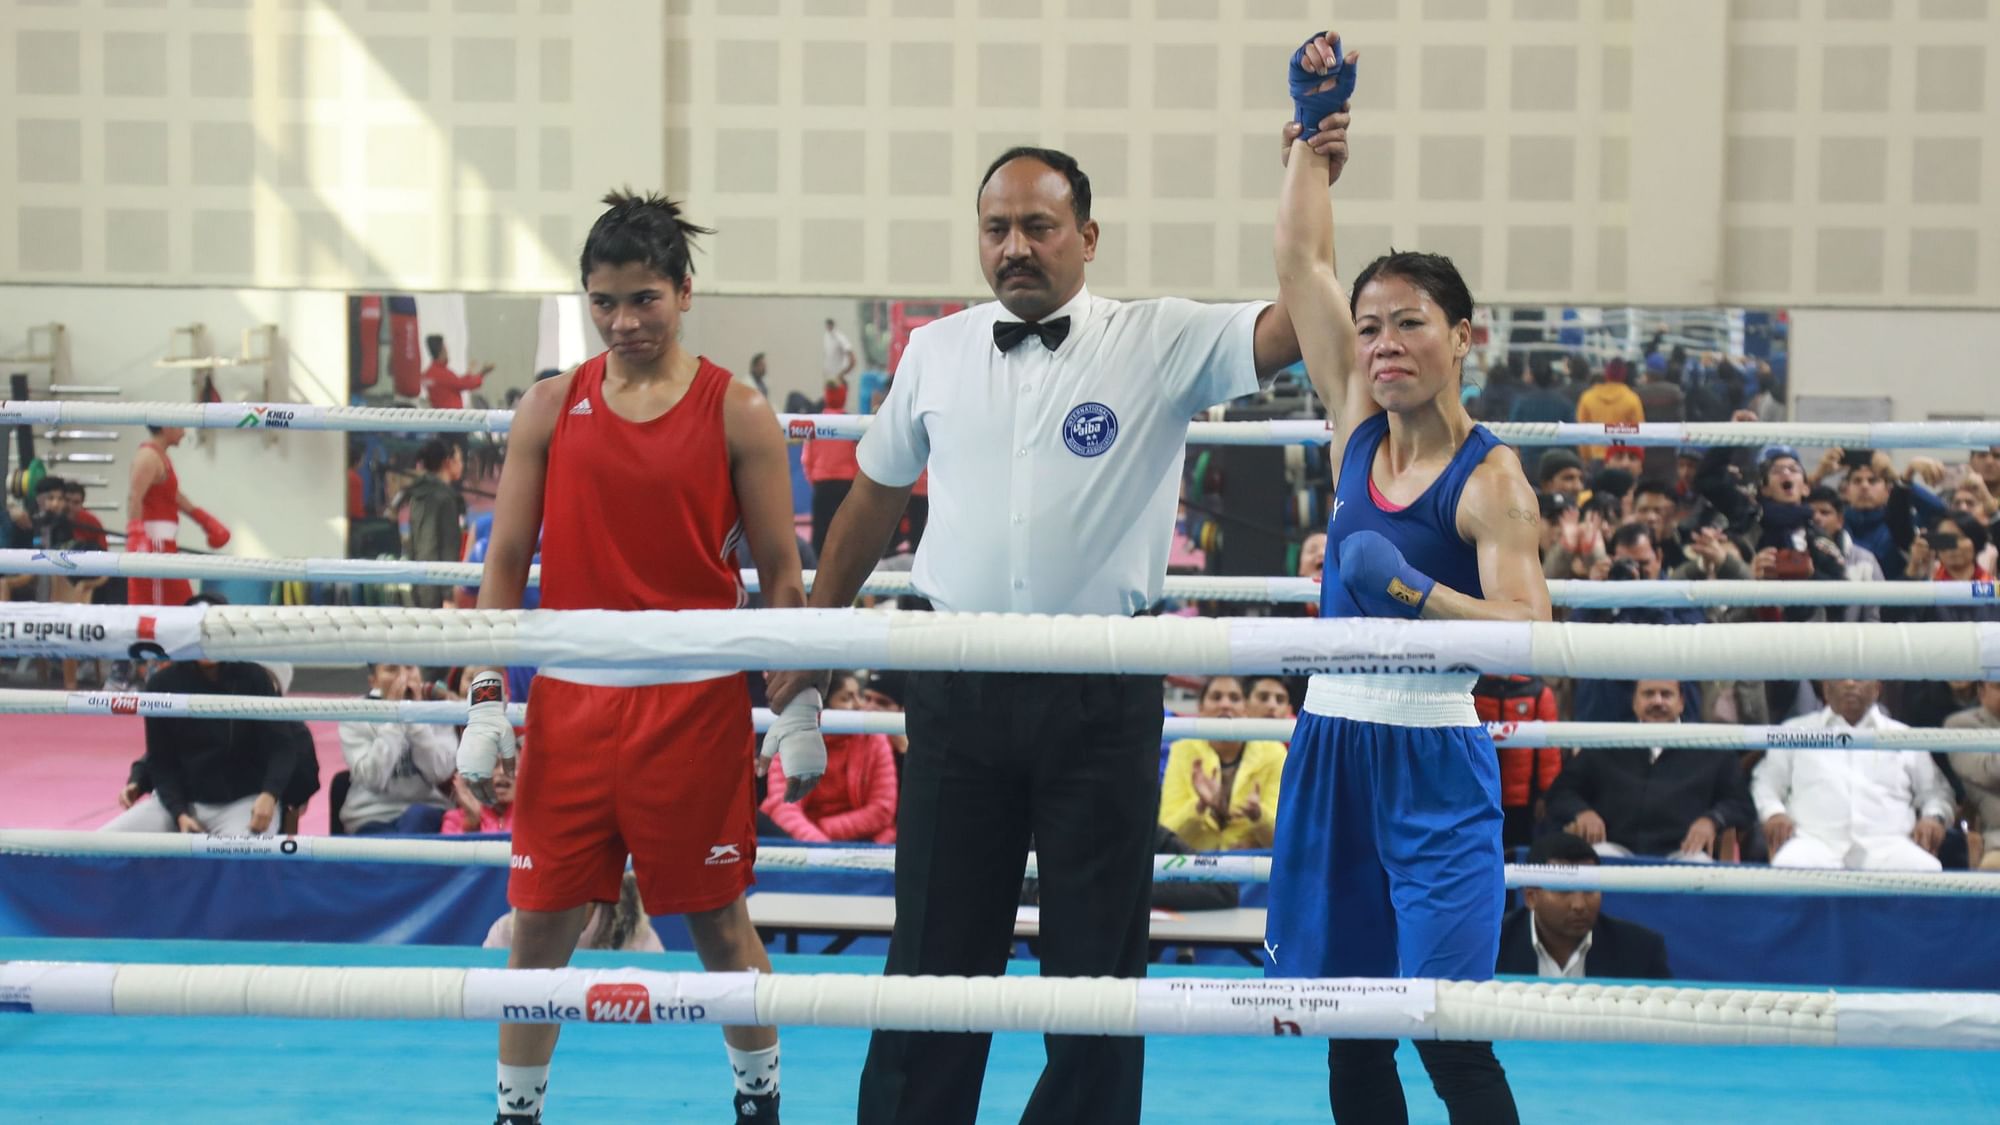 Mary Kom beat Nikhat  Zareen in the final trial match to confirm her spot in the Indian contingent for the Olympic qualifiers in China in 2020.